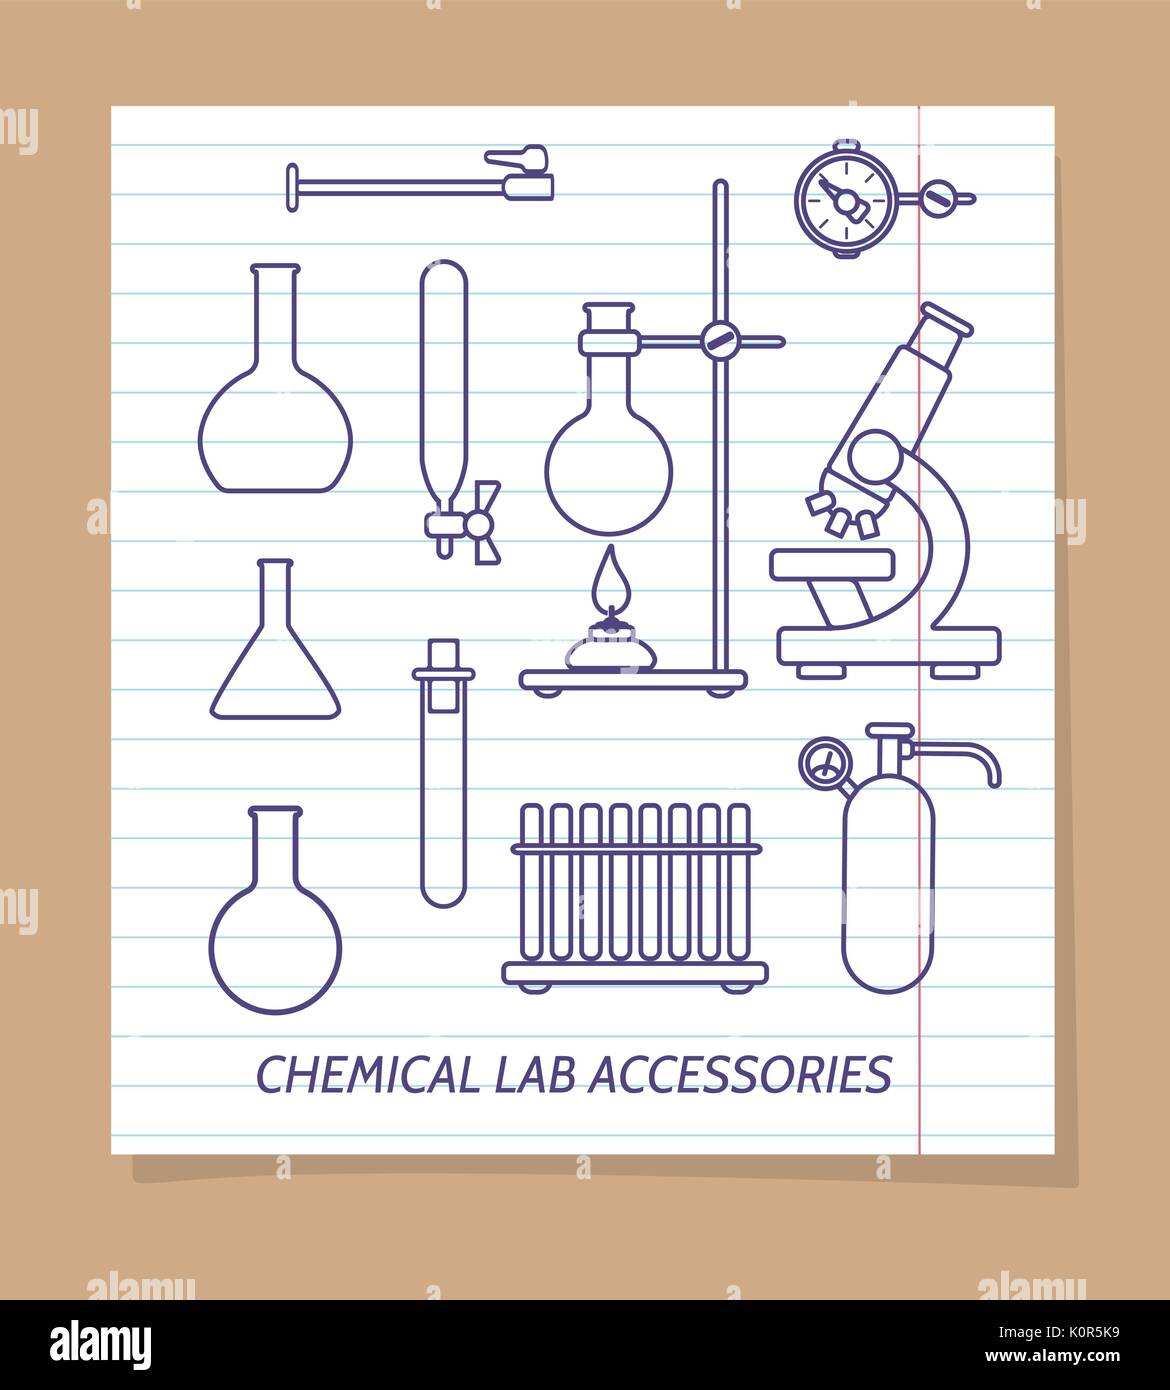 Chemical lab accessories line icons on notebook page, vector illustration Stock Vector